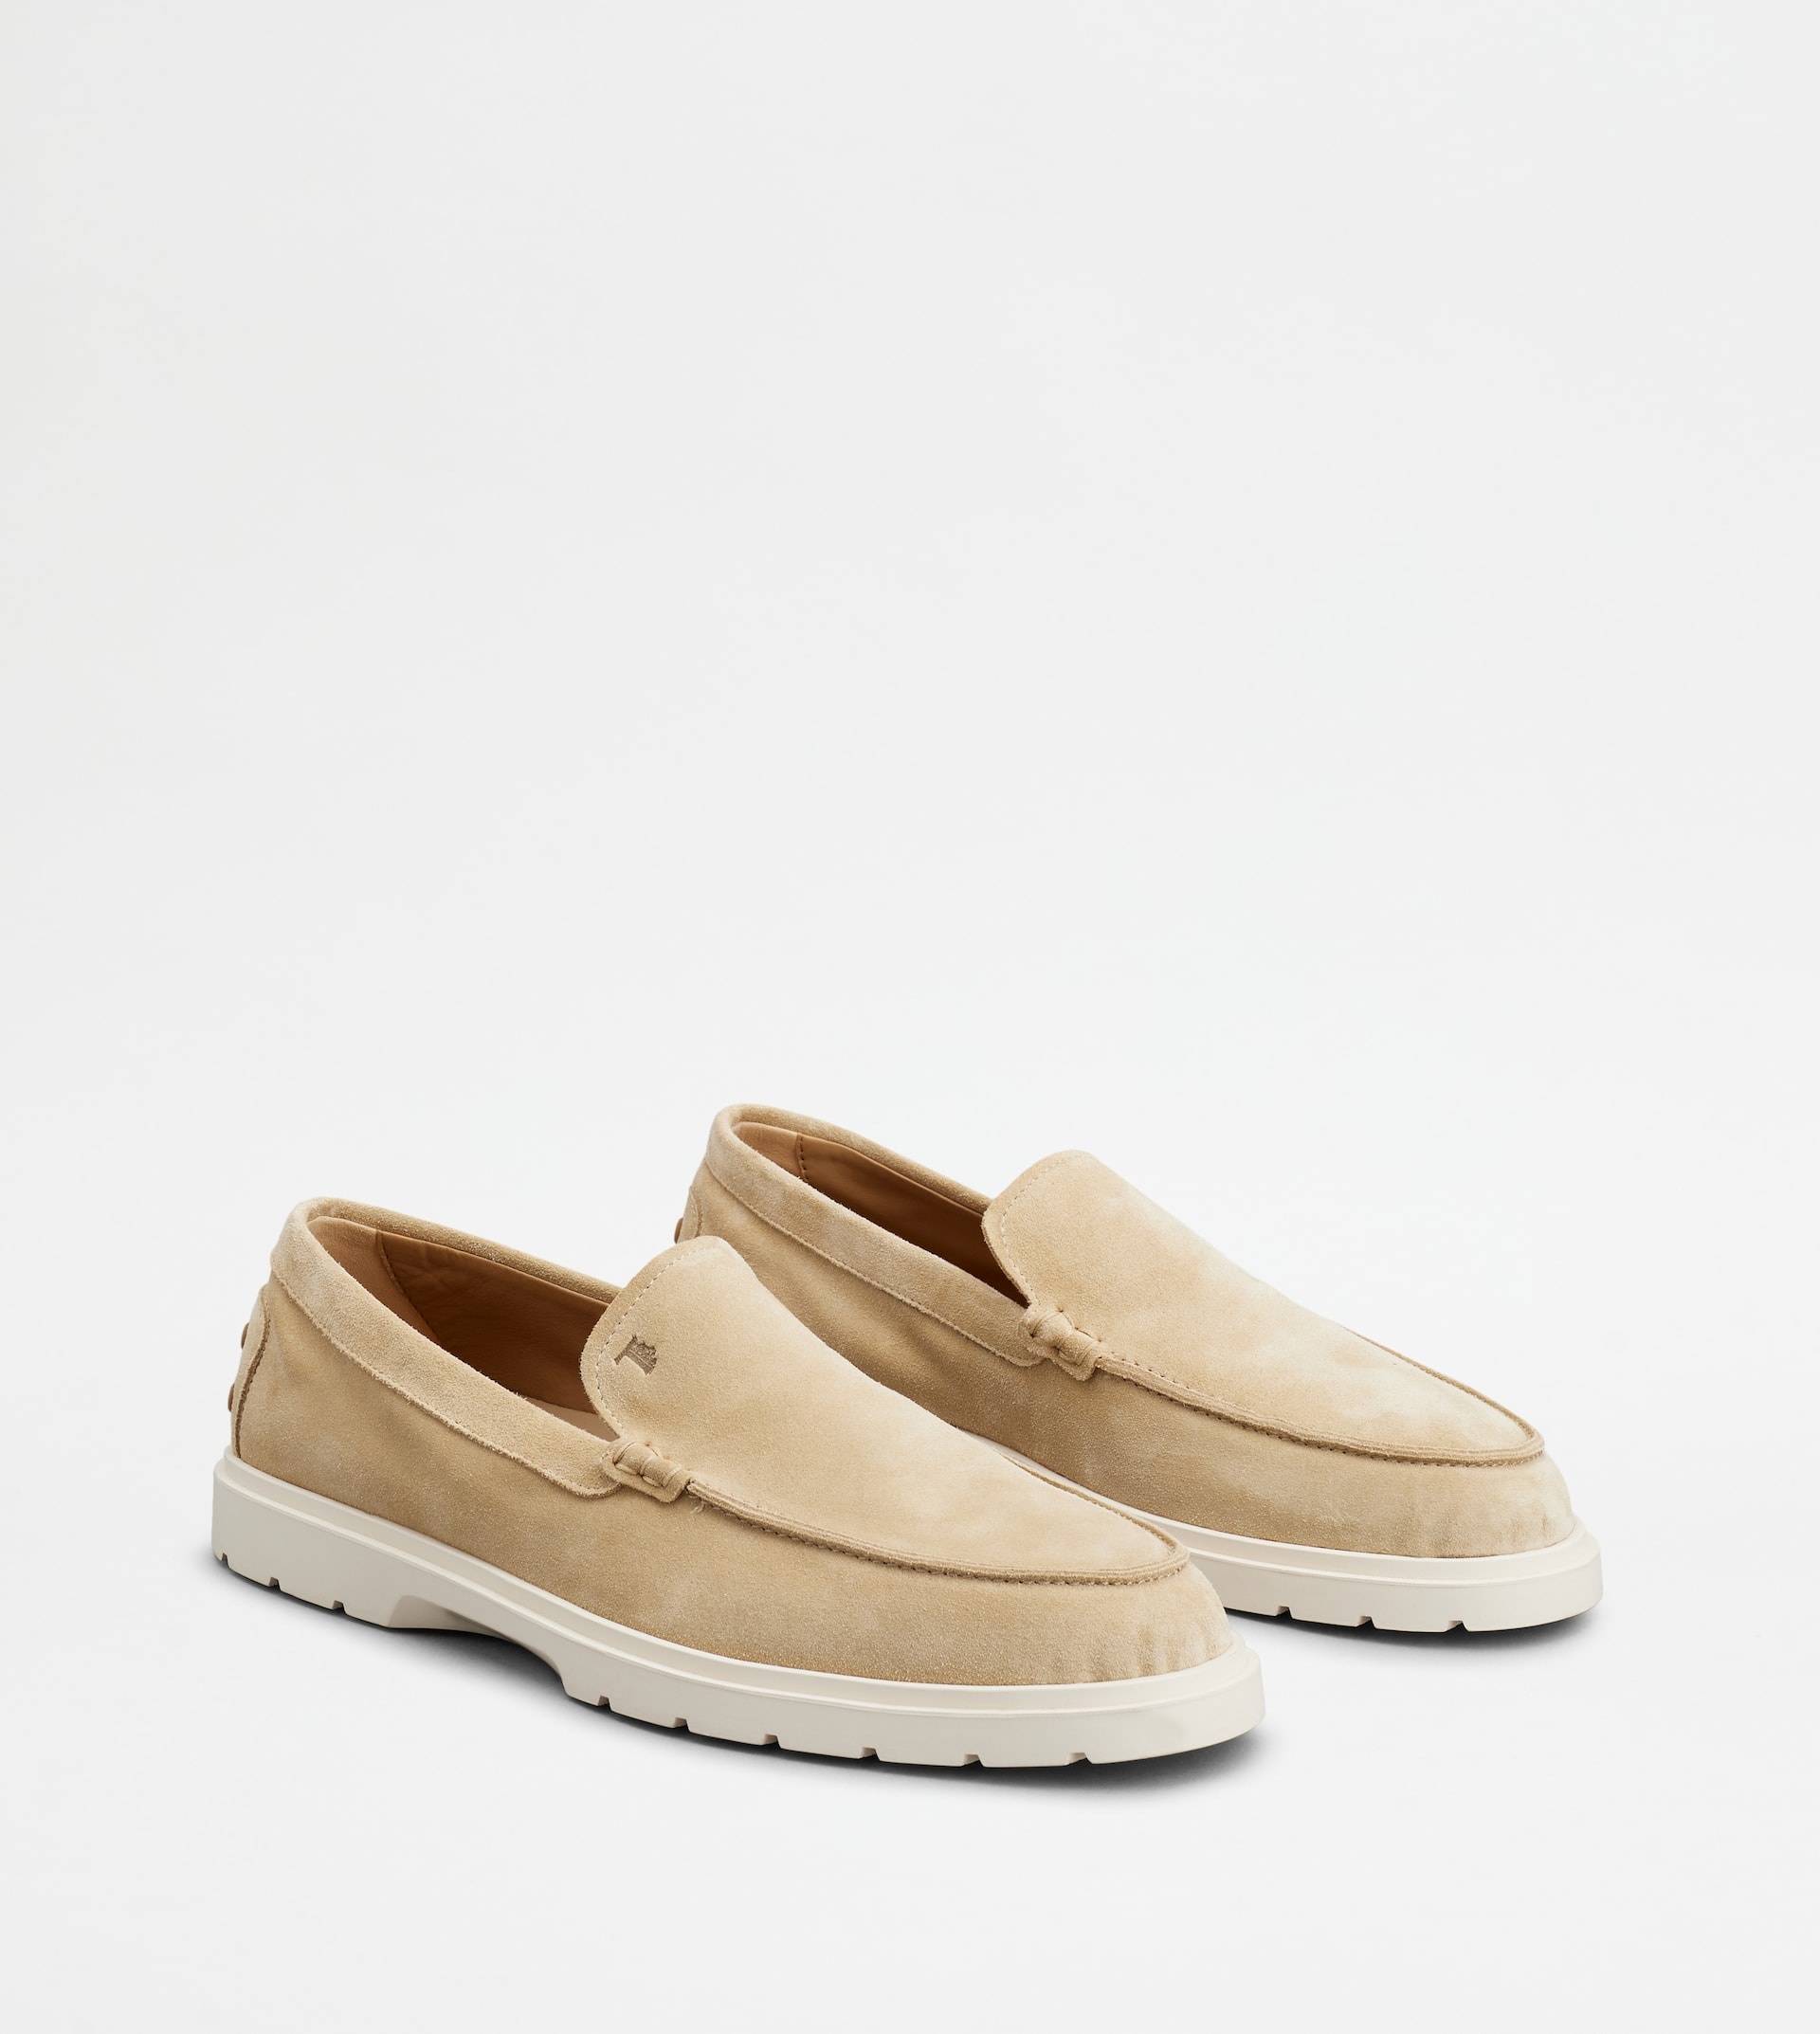 SLIPPER LOAFERS IN SUEDE - OFF WHITE - 4